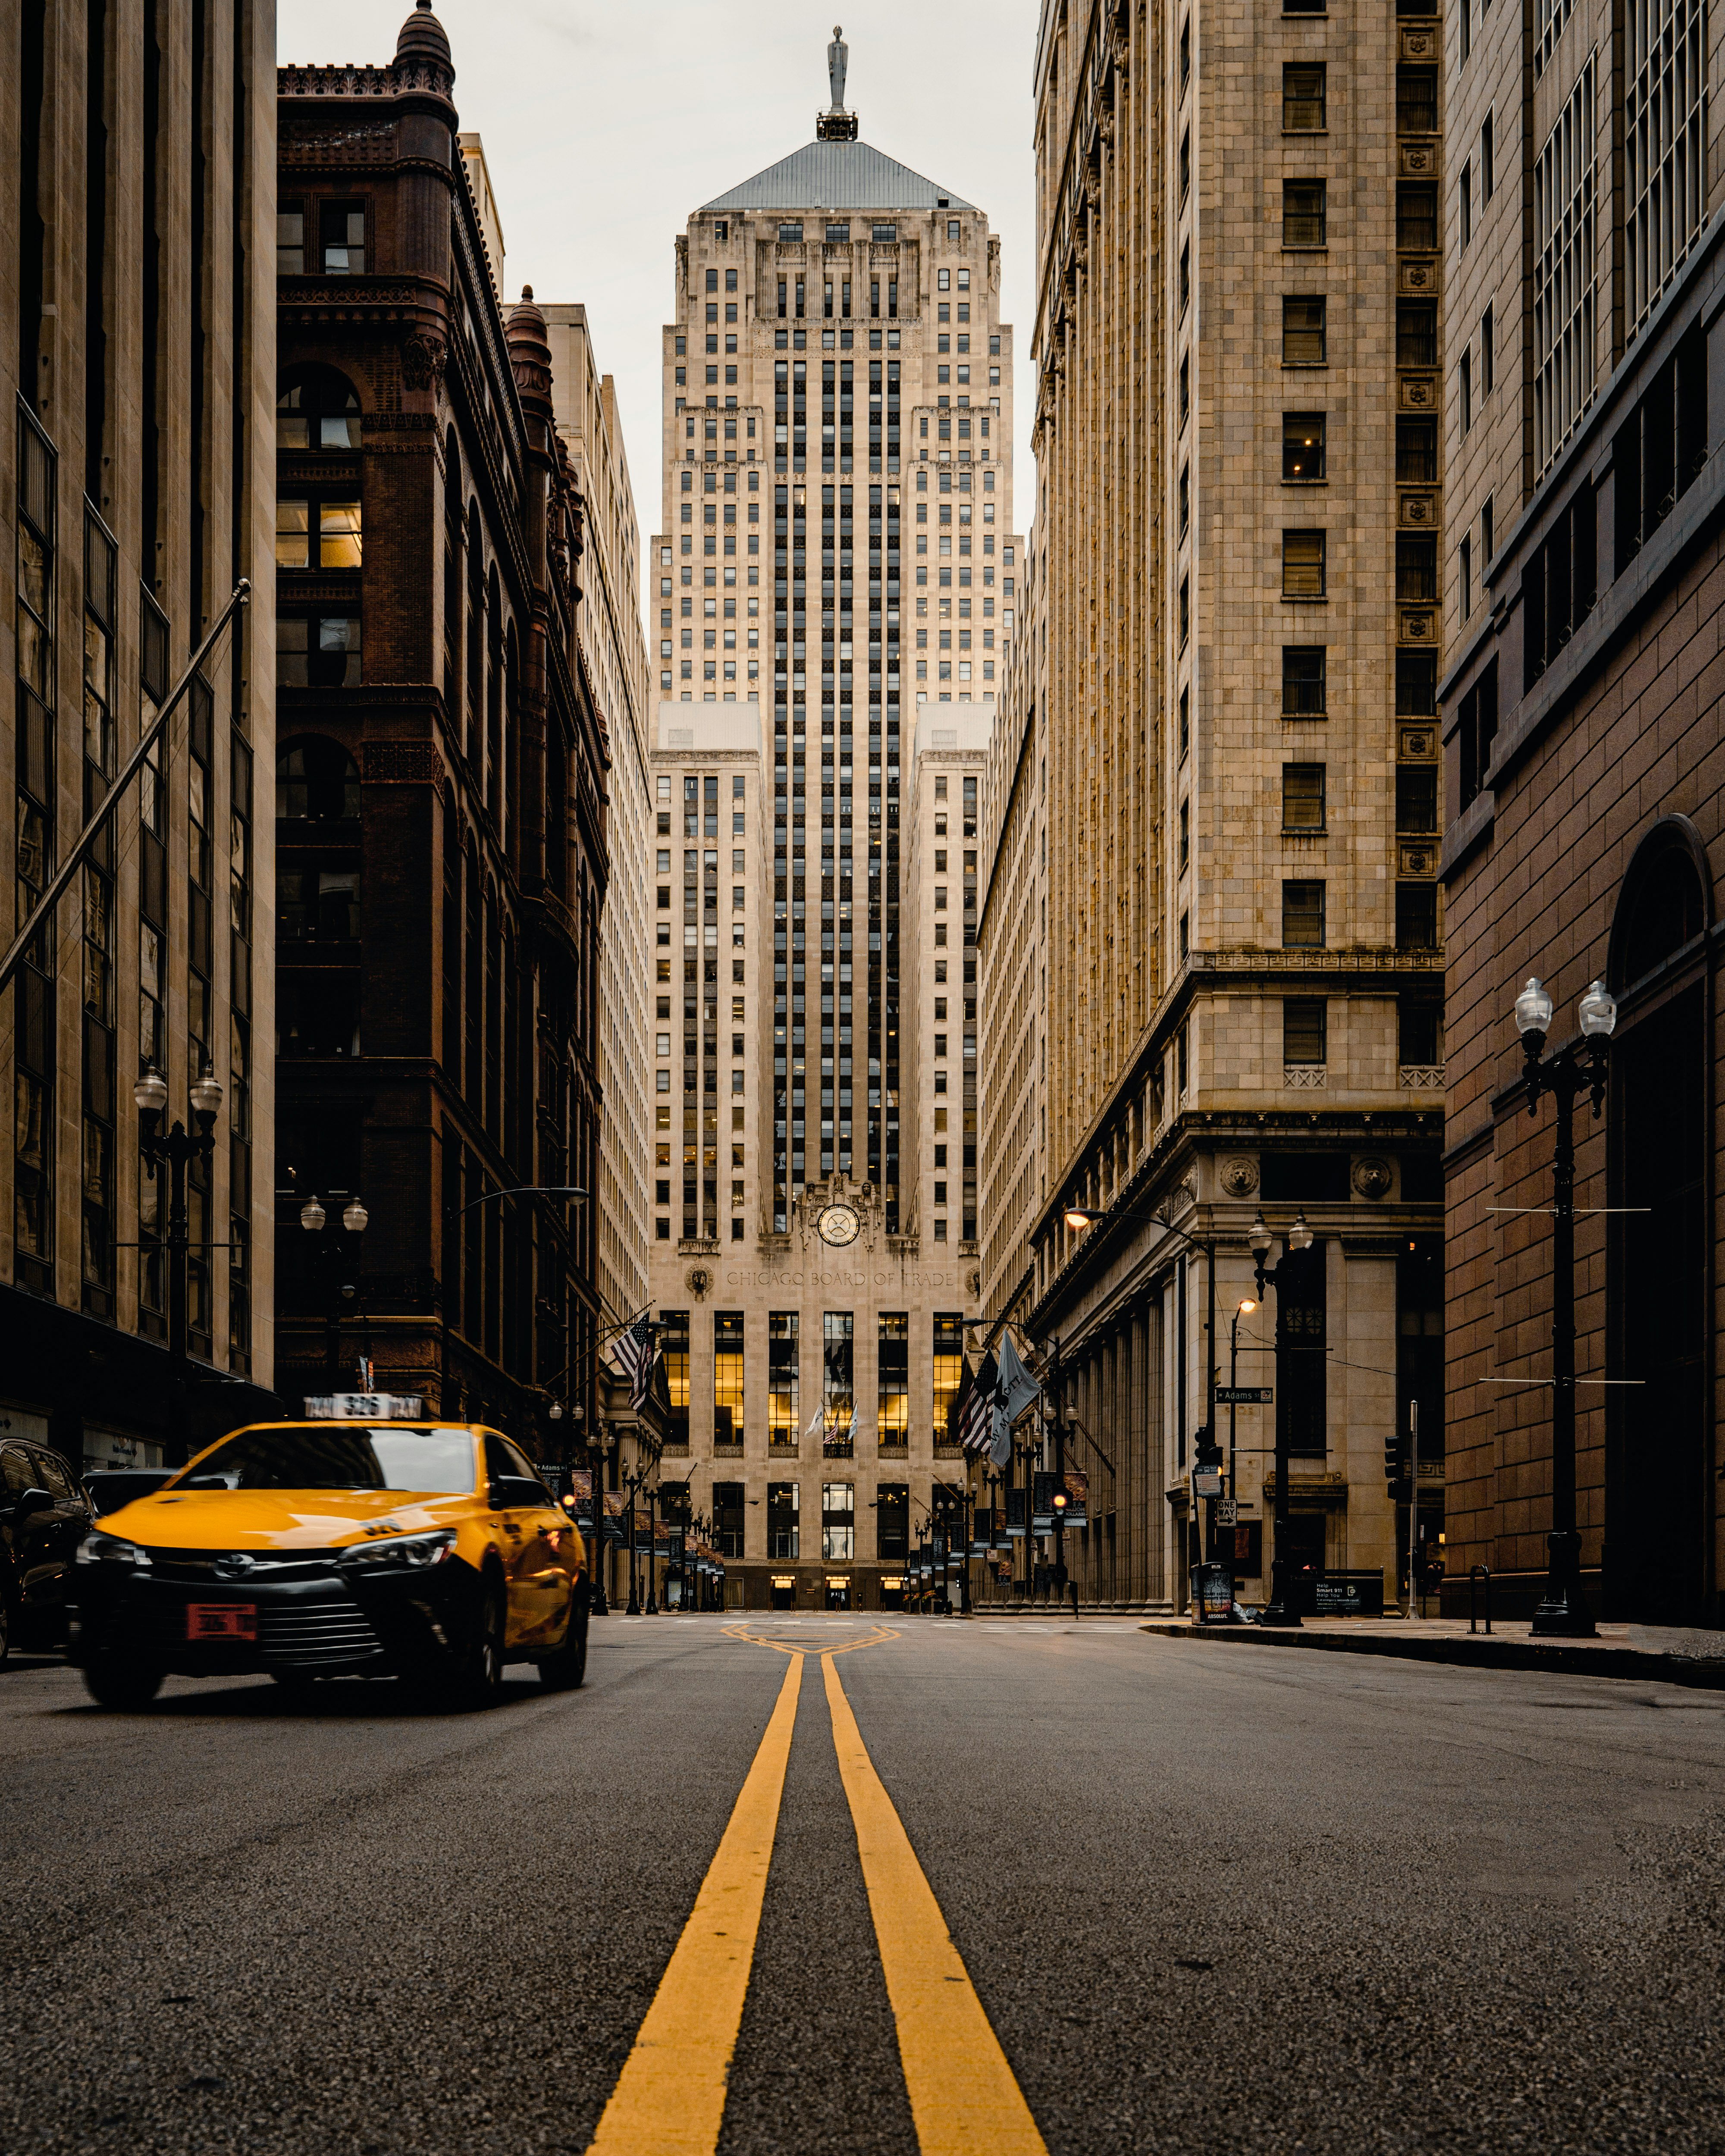 yellow car on road in between high rise buildings during daytime